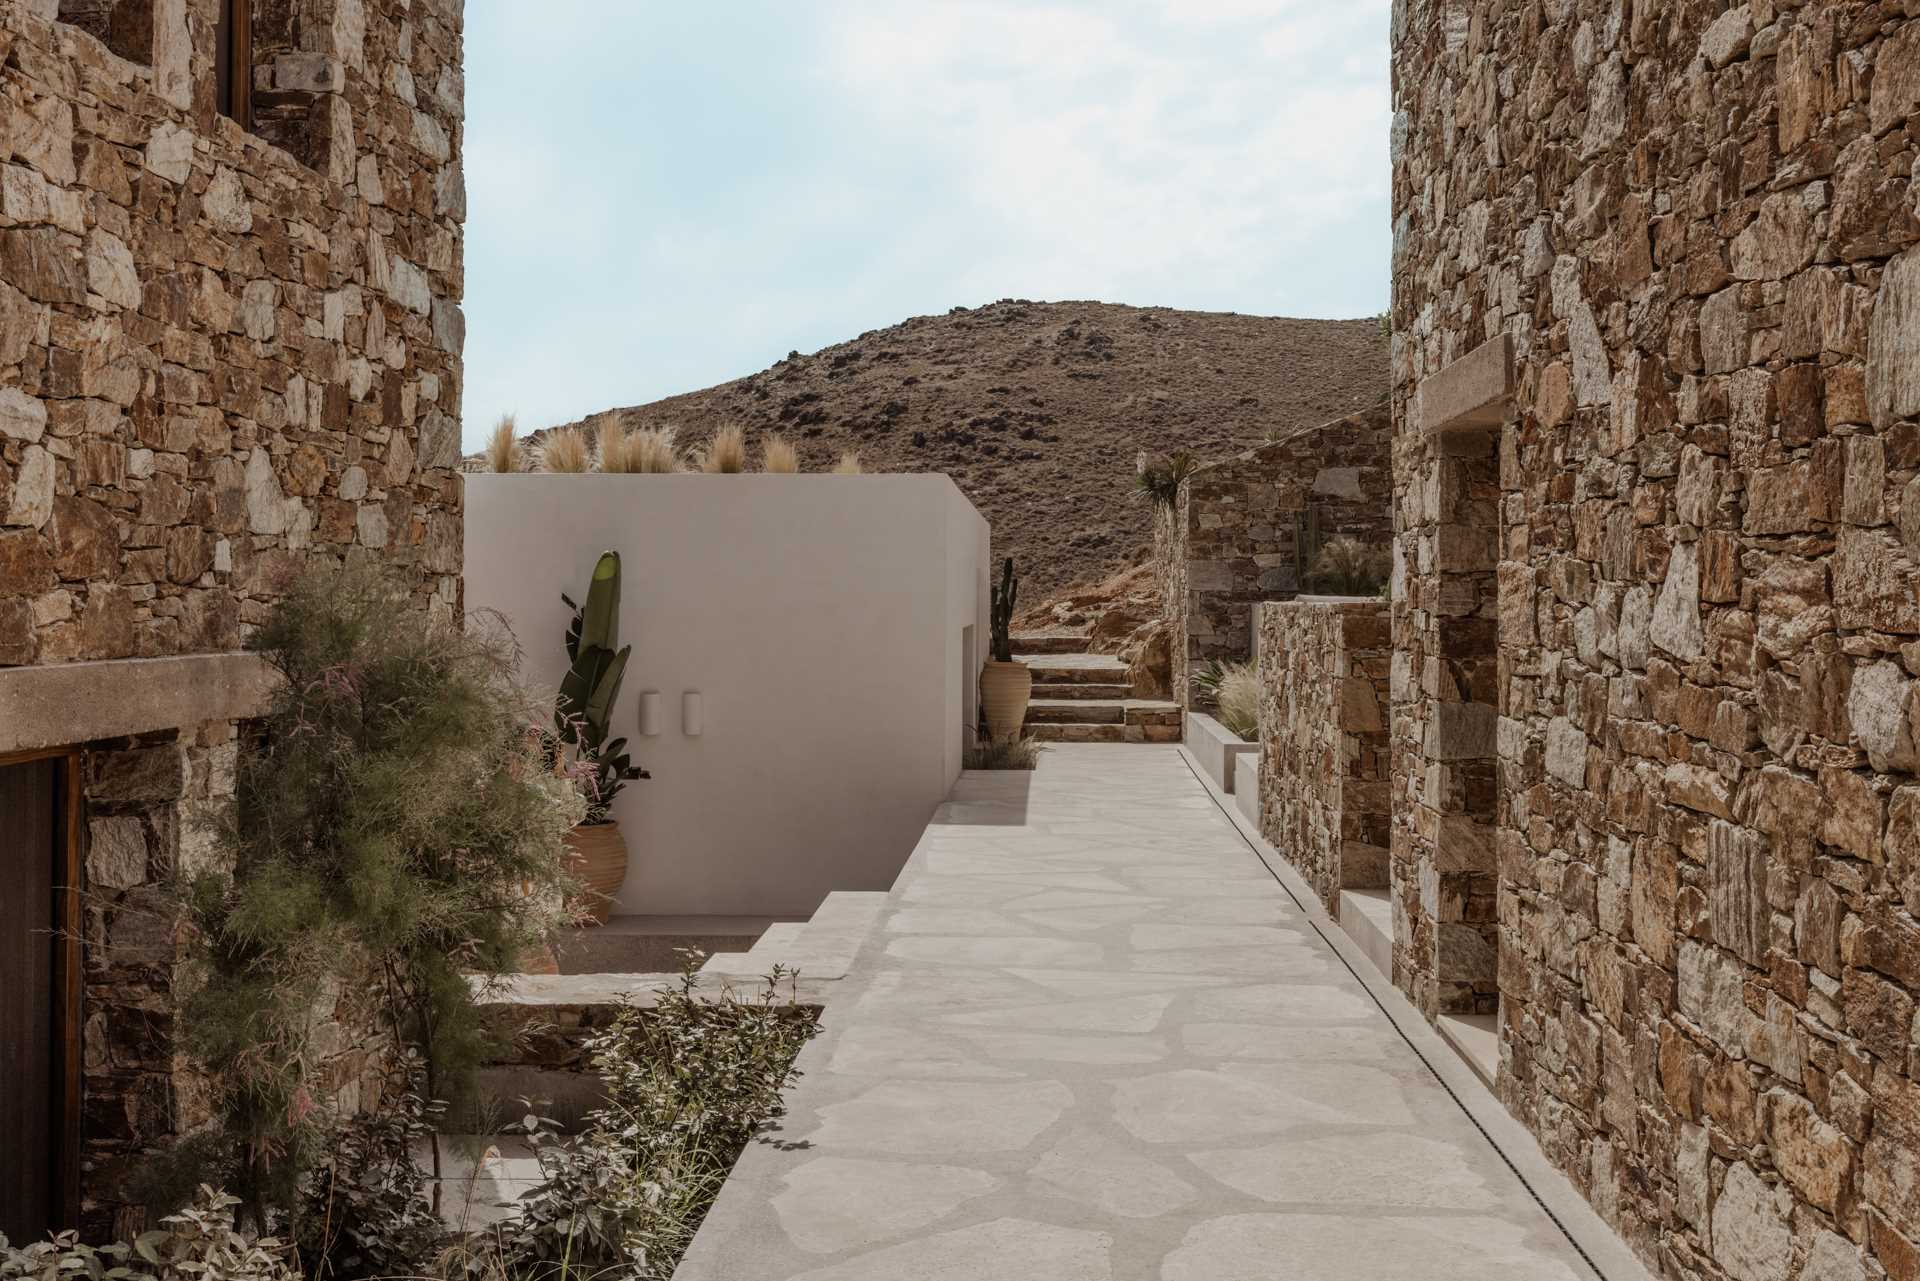 This modern ،me is arranged around a network of pathways that connect both enclosed ،es and the various terraces, gardens, and patios on site.